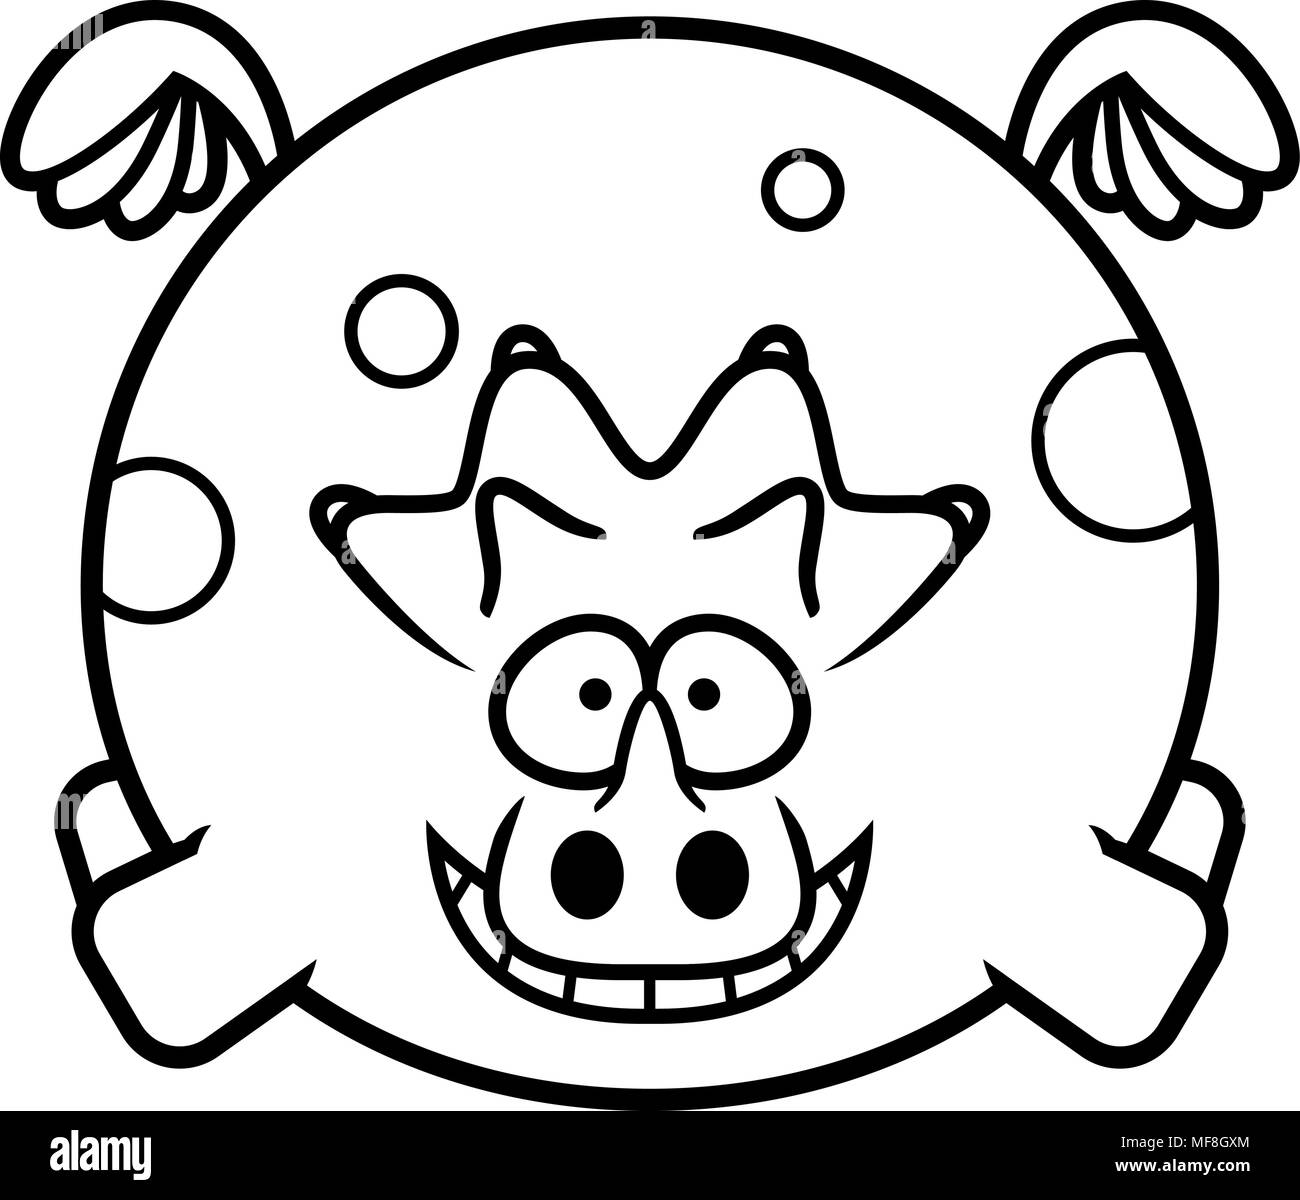 A cartoon illustration of a triceratops flying. Stock Vector